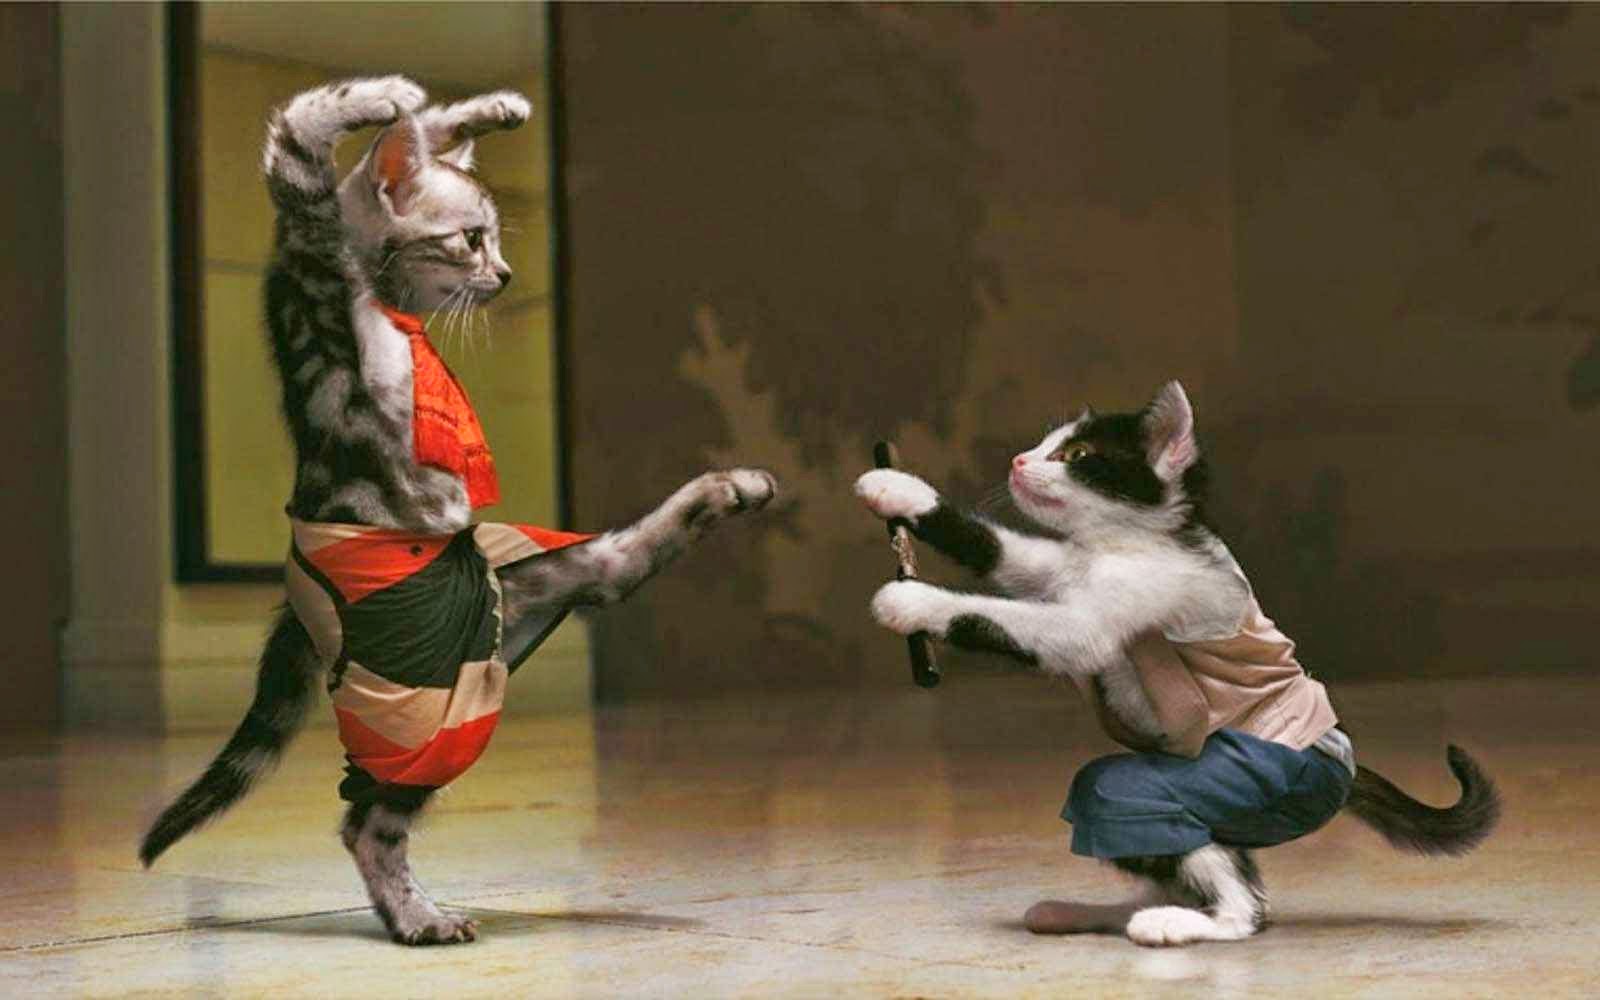 Karate Cat Funny HD Wallpapers - HD Wallpapers Storm | Free ...